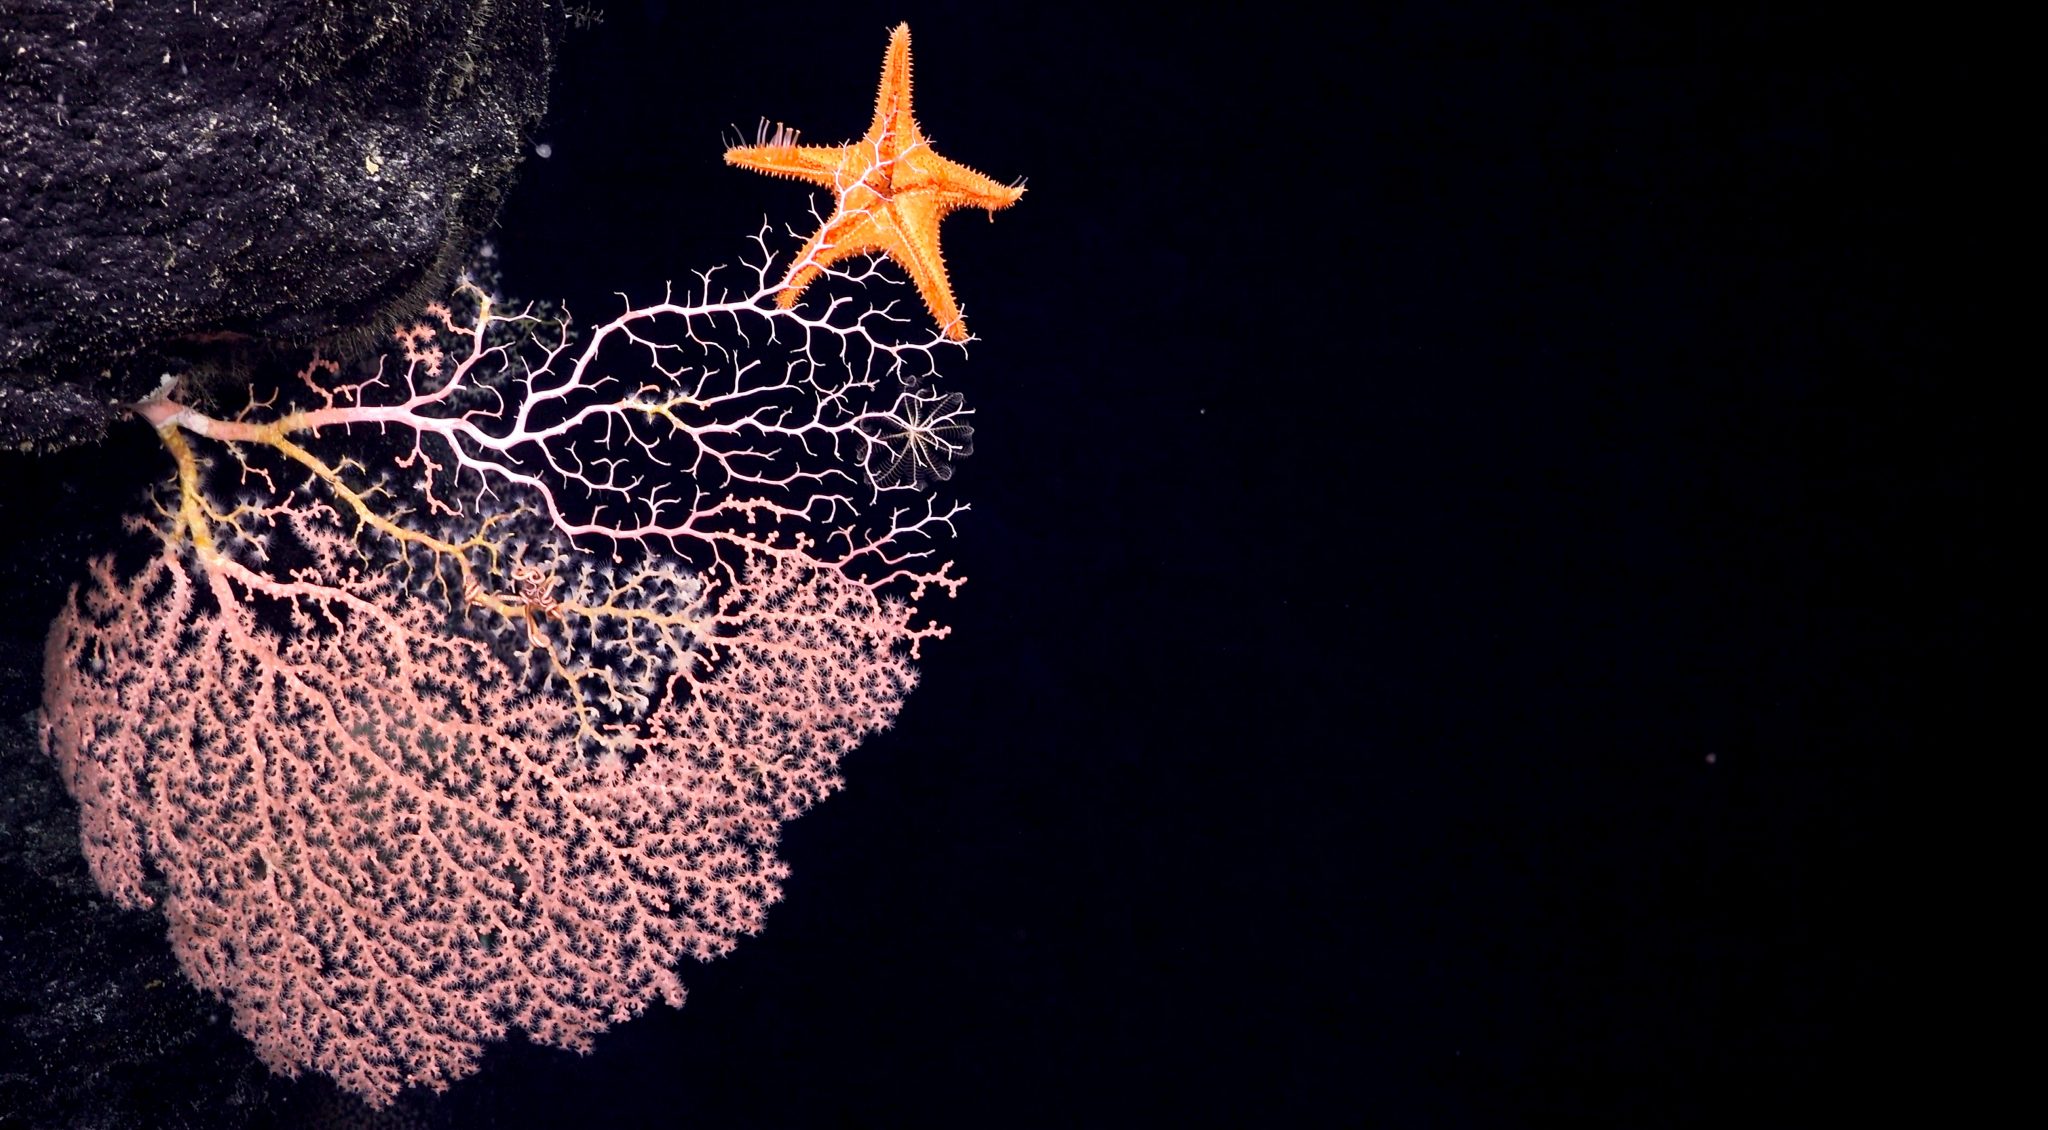 Here a corallivorous deep-sea sea star Evoplosoma eats live coral at a depth of 2004m on a previously unexplored ABNJ seamount (Area Beyond National Jurisdiction).